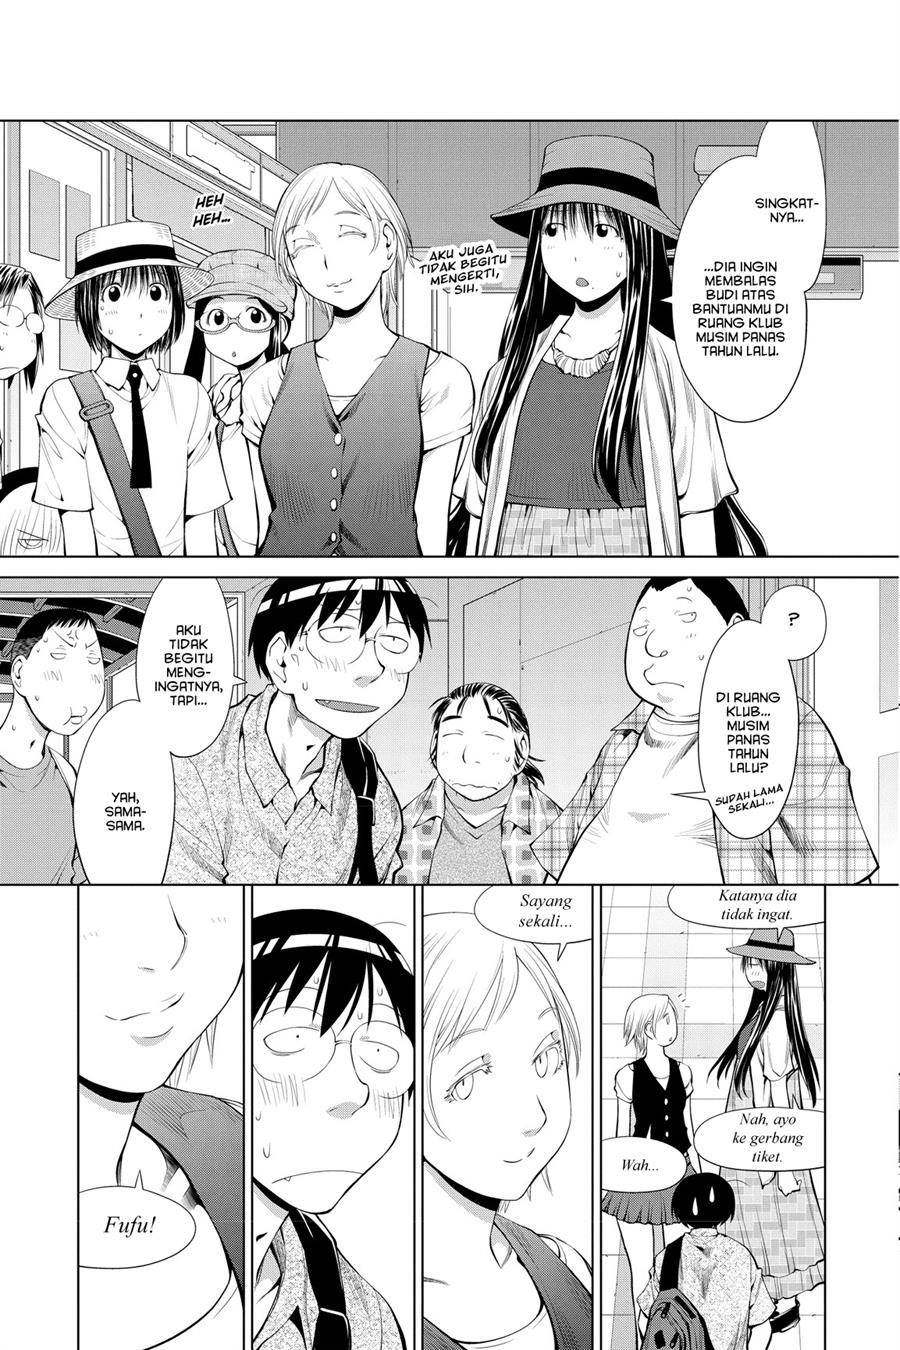 Genshiken – The Society for the Study of Modern Visual Culture Chapter 65 Image 4